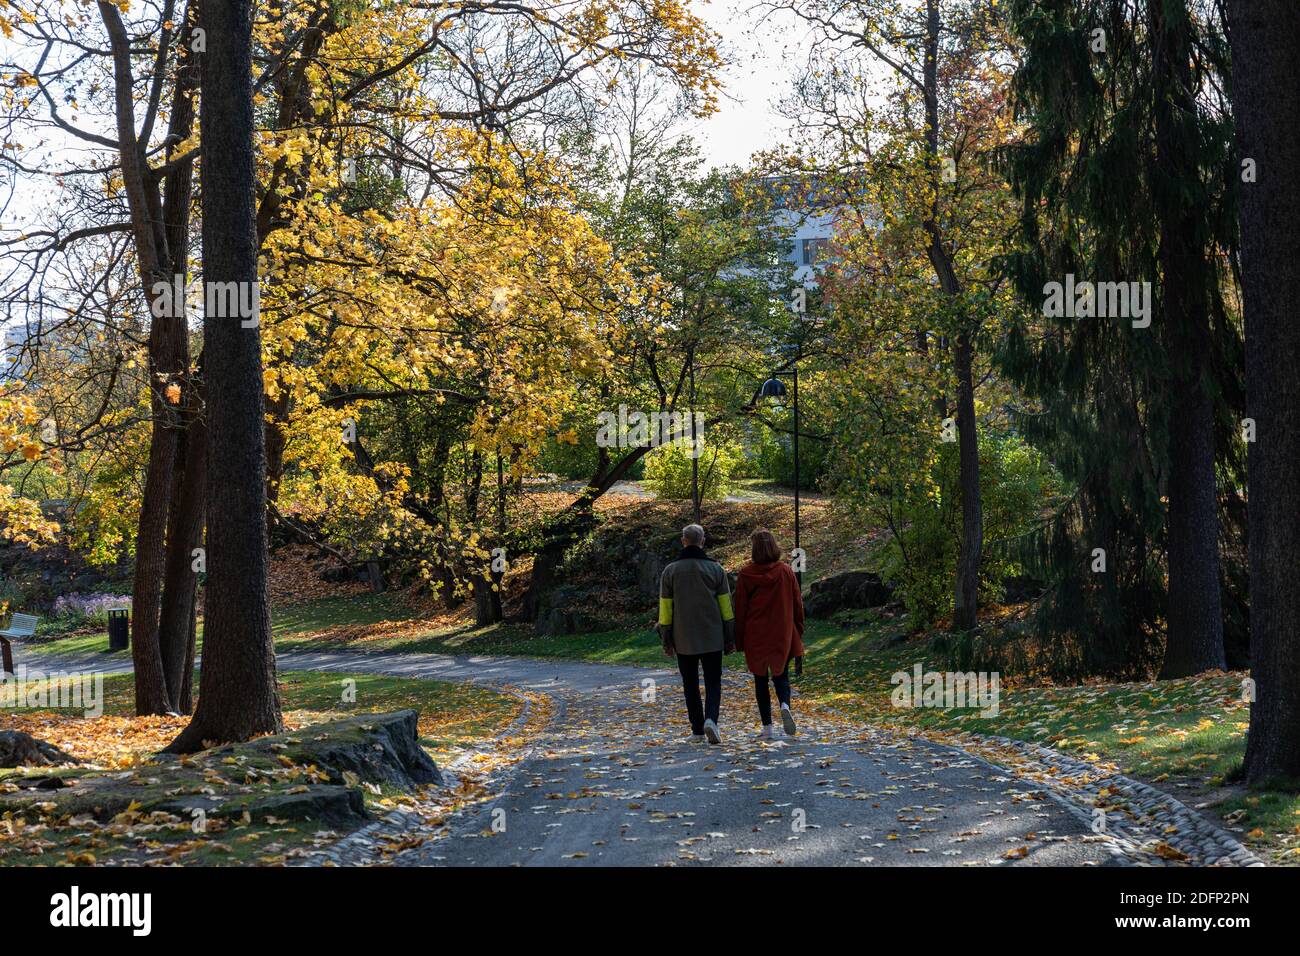 Couple strolling in Näsinpuisto park with autumn colors and fallen leaves on the ground in Tampere, Finland Stock Photo